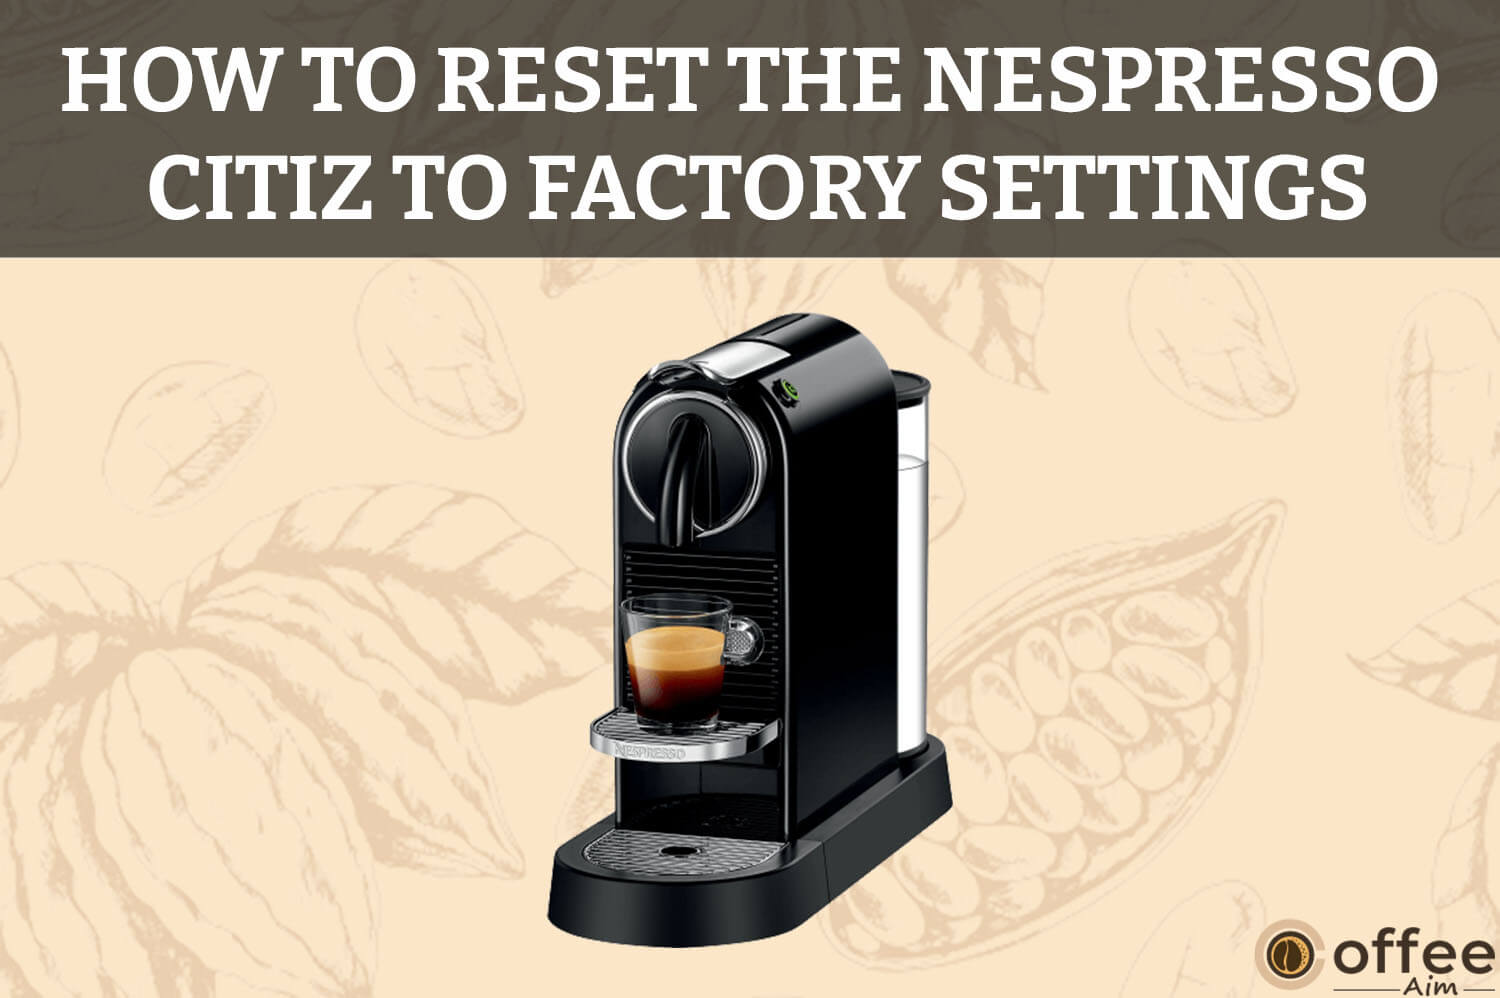 Featured image for the article "How To Reset The Nespresso Citiz To Factory Settings"